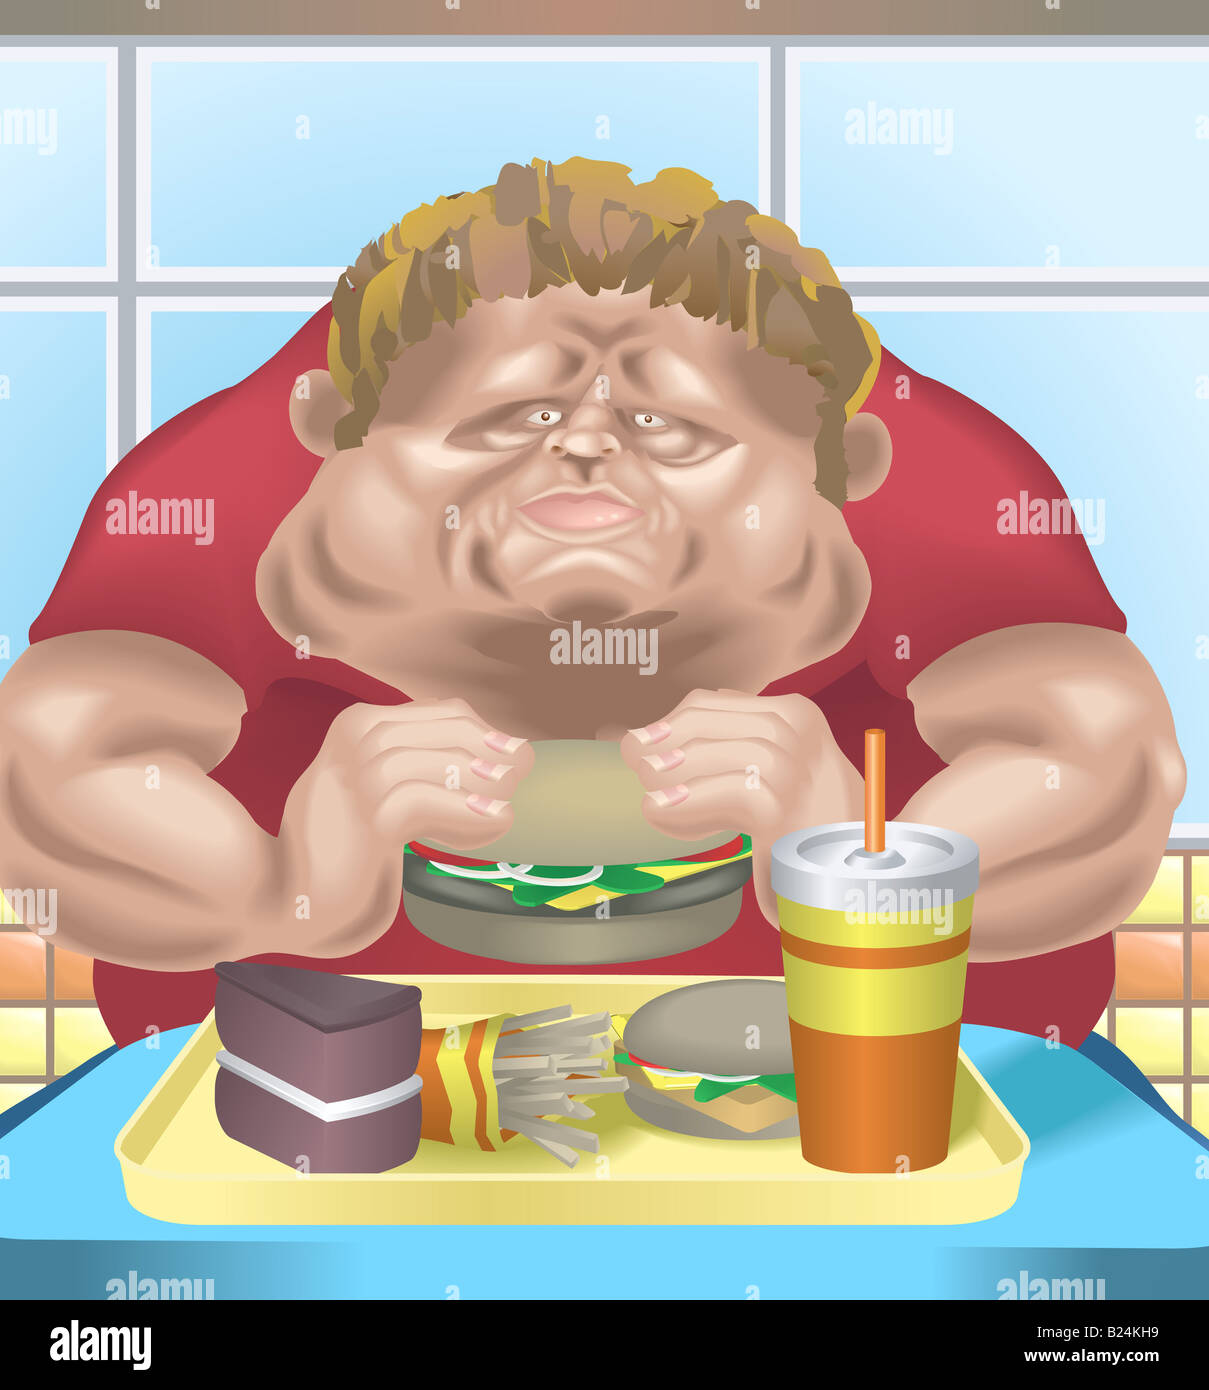 Obese man in fast food restaurant An obese man in fast food restaurant consuming junk food. Stock Photo